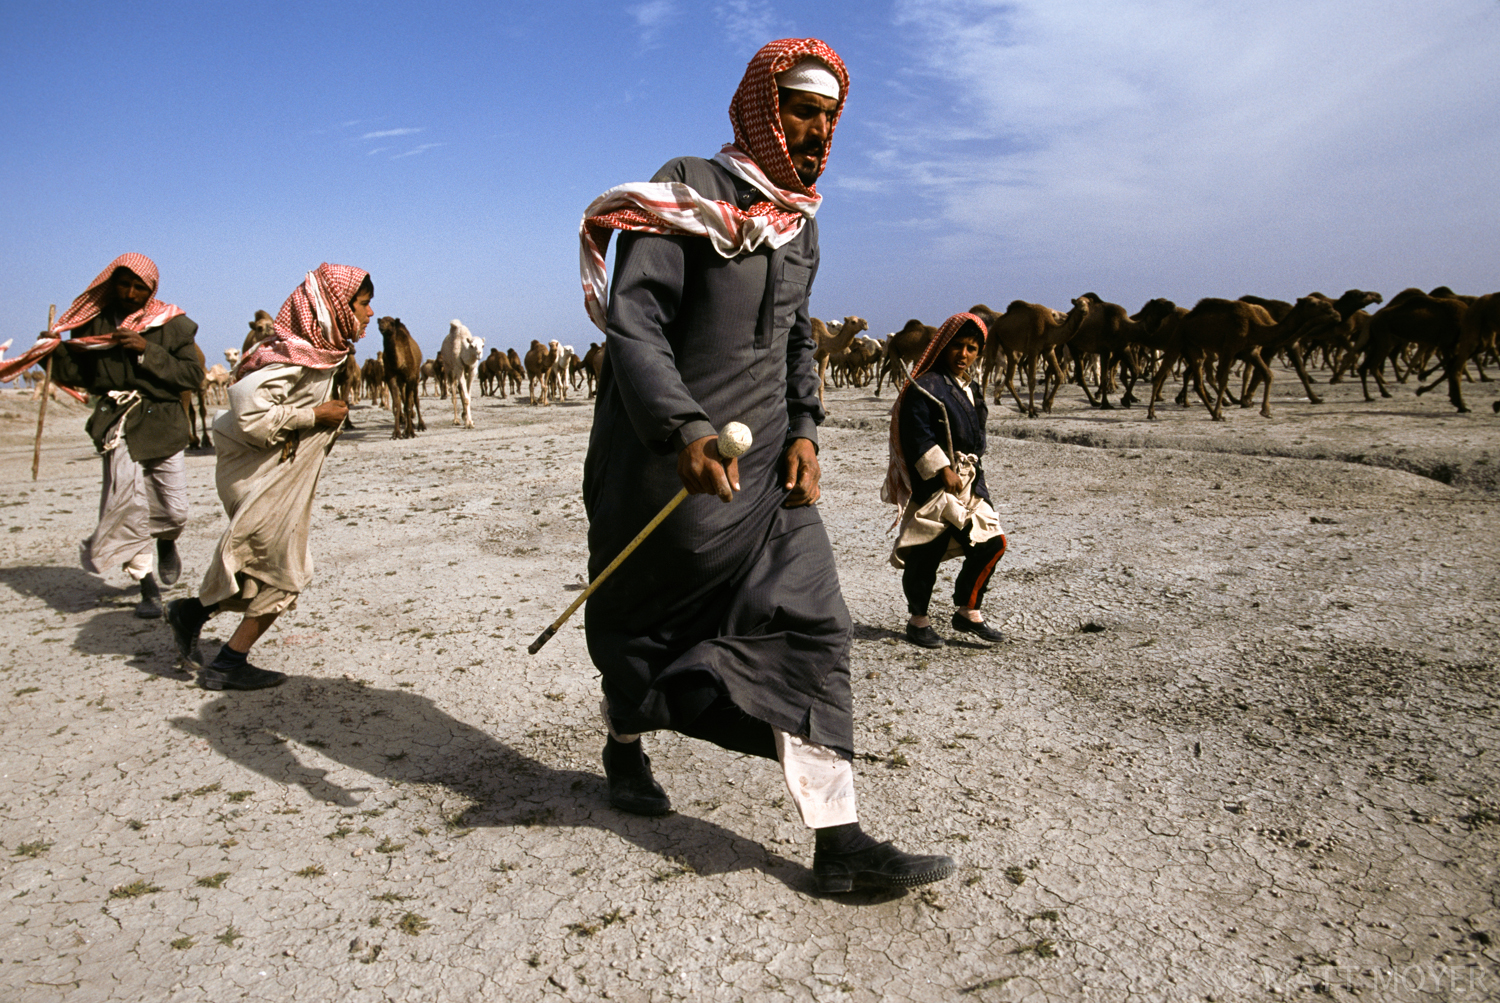  Shiite Bedouin camel herders walk across the desert with their herd outside Nasaria, Iraq. 